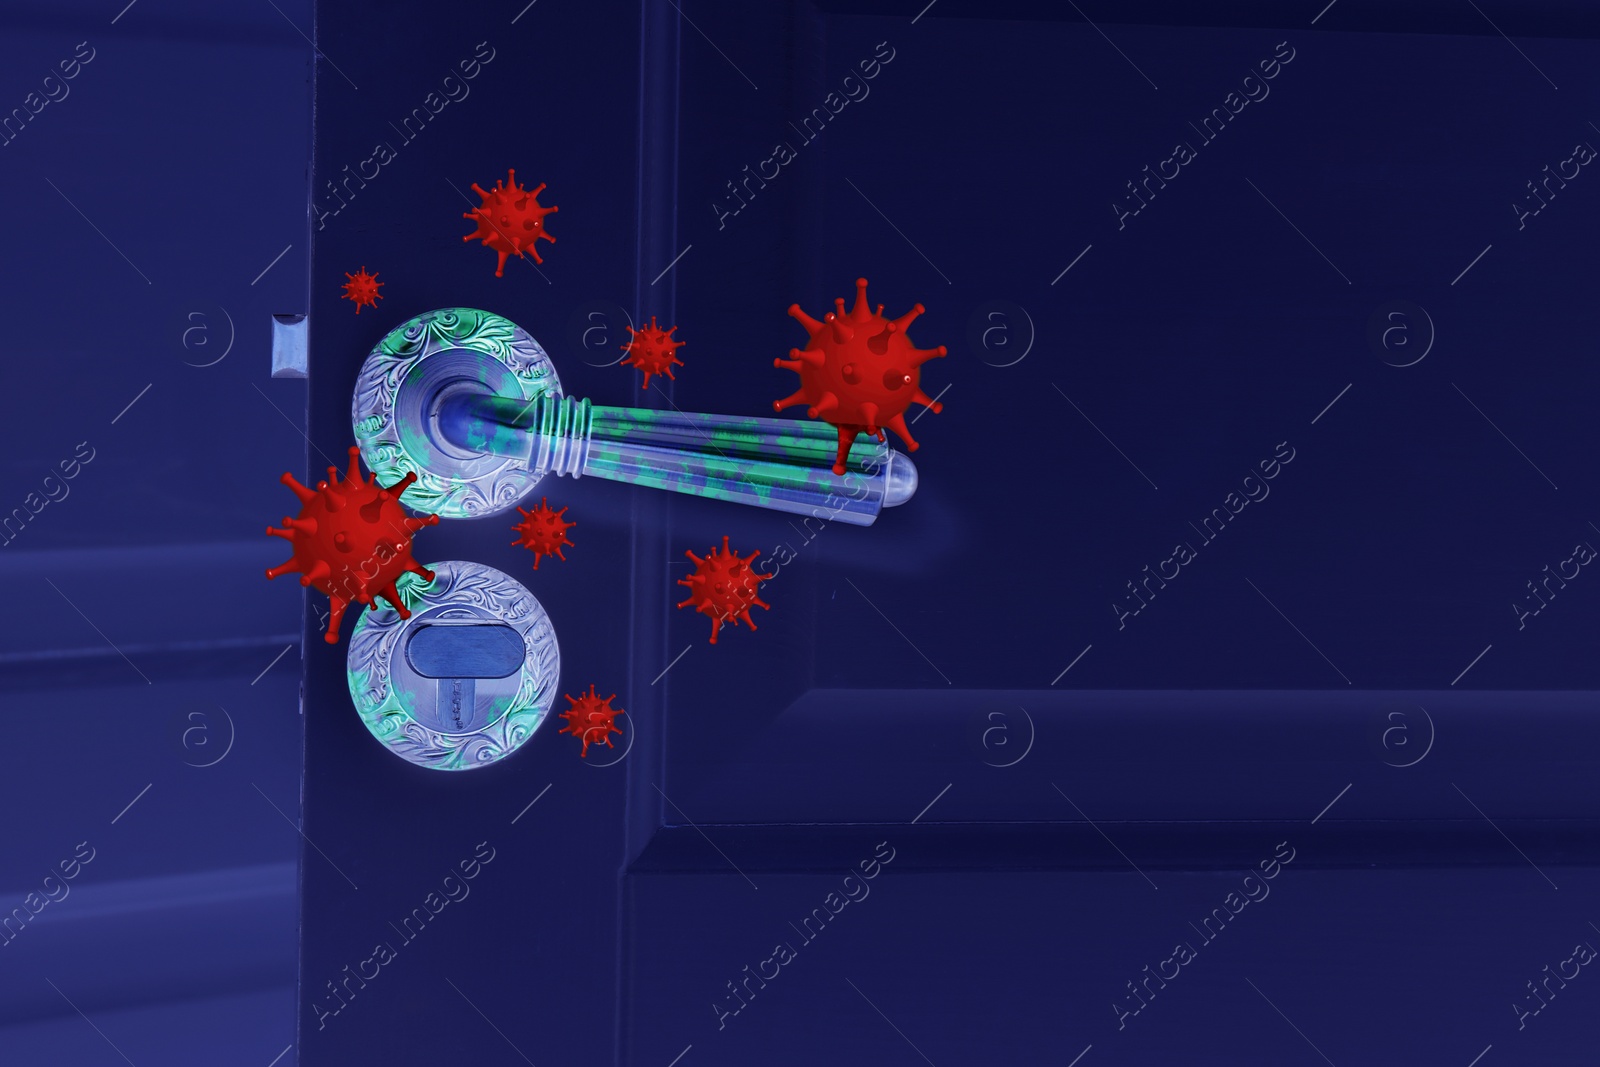 Image of Virus molecules under UV light on door handle. Avoid touching objects and surfaces in public spaces during COVID-19 pandemic